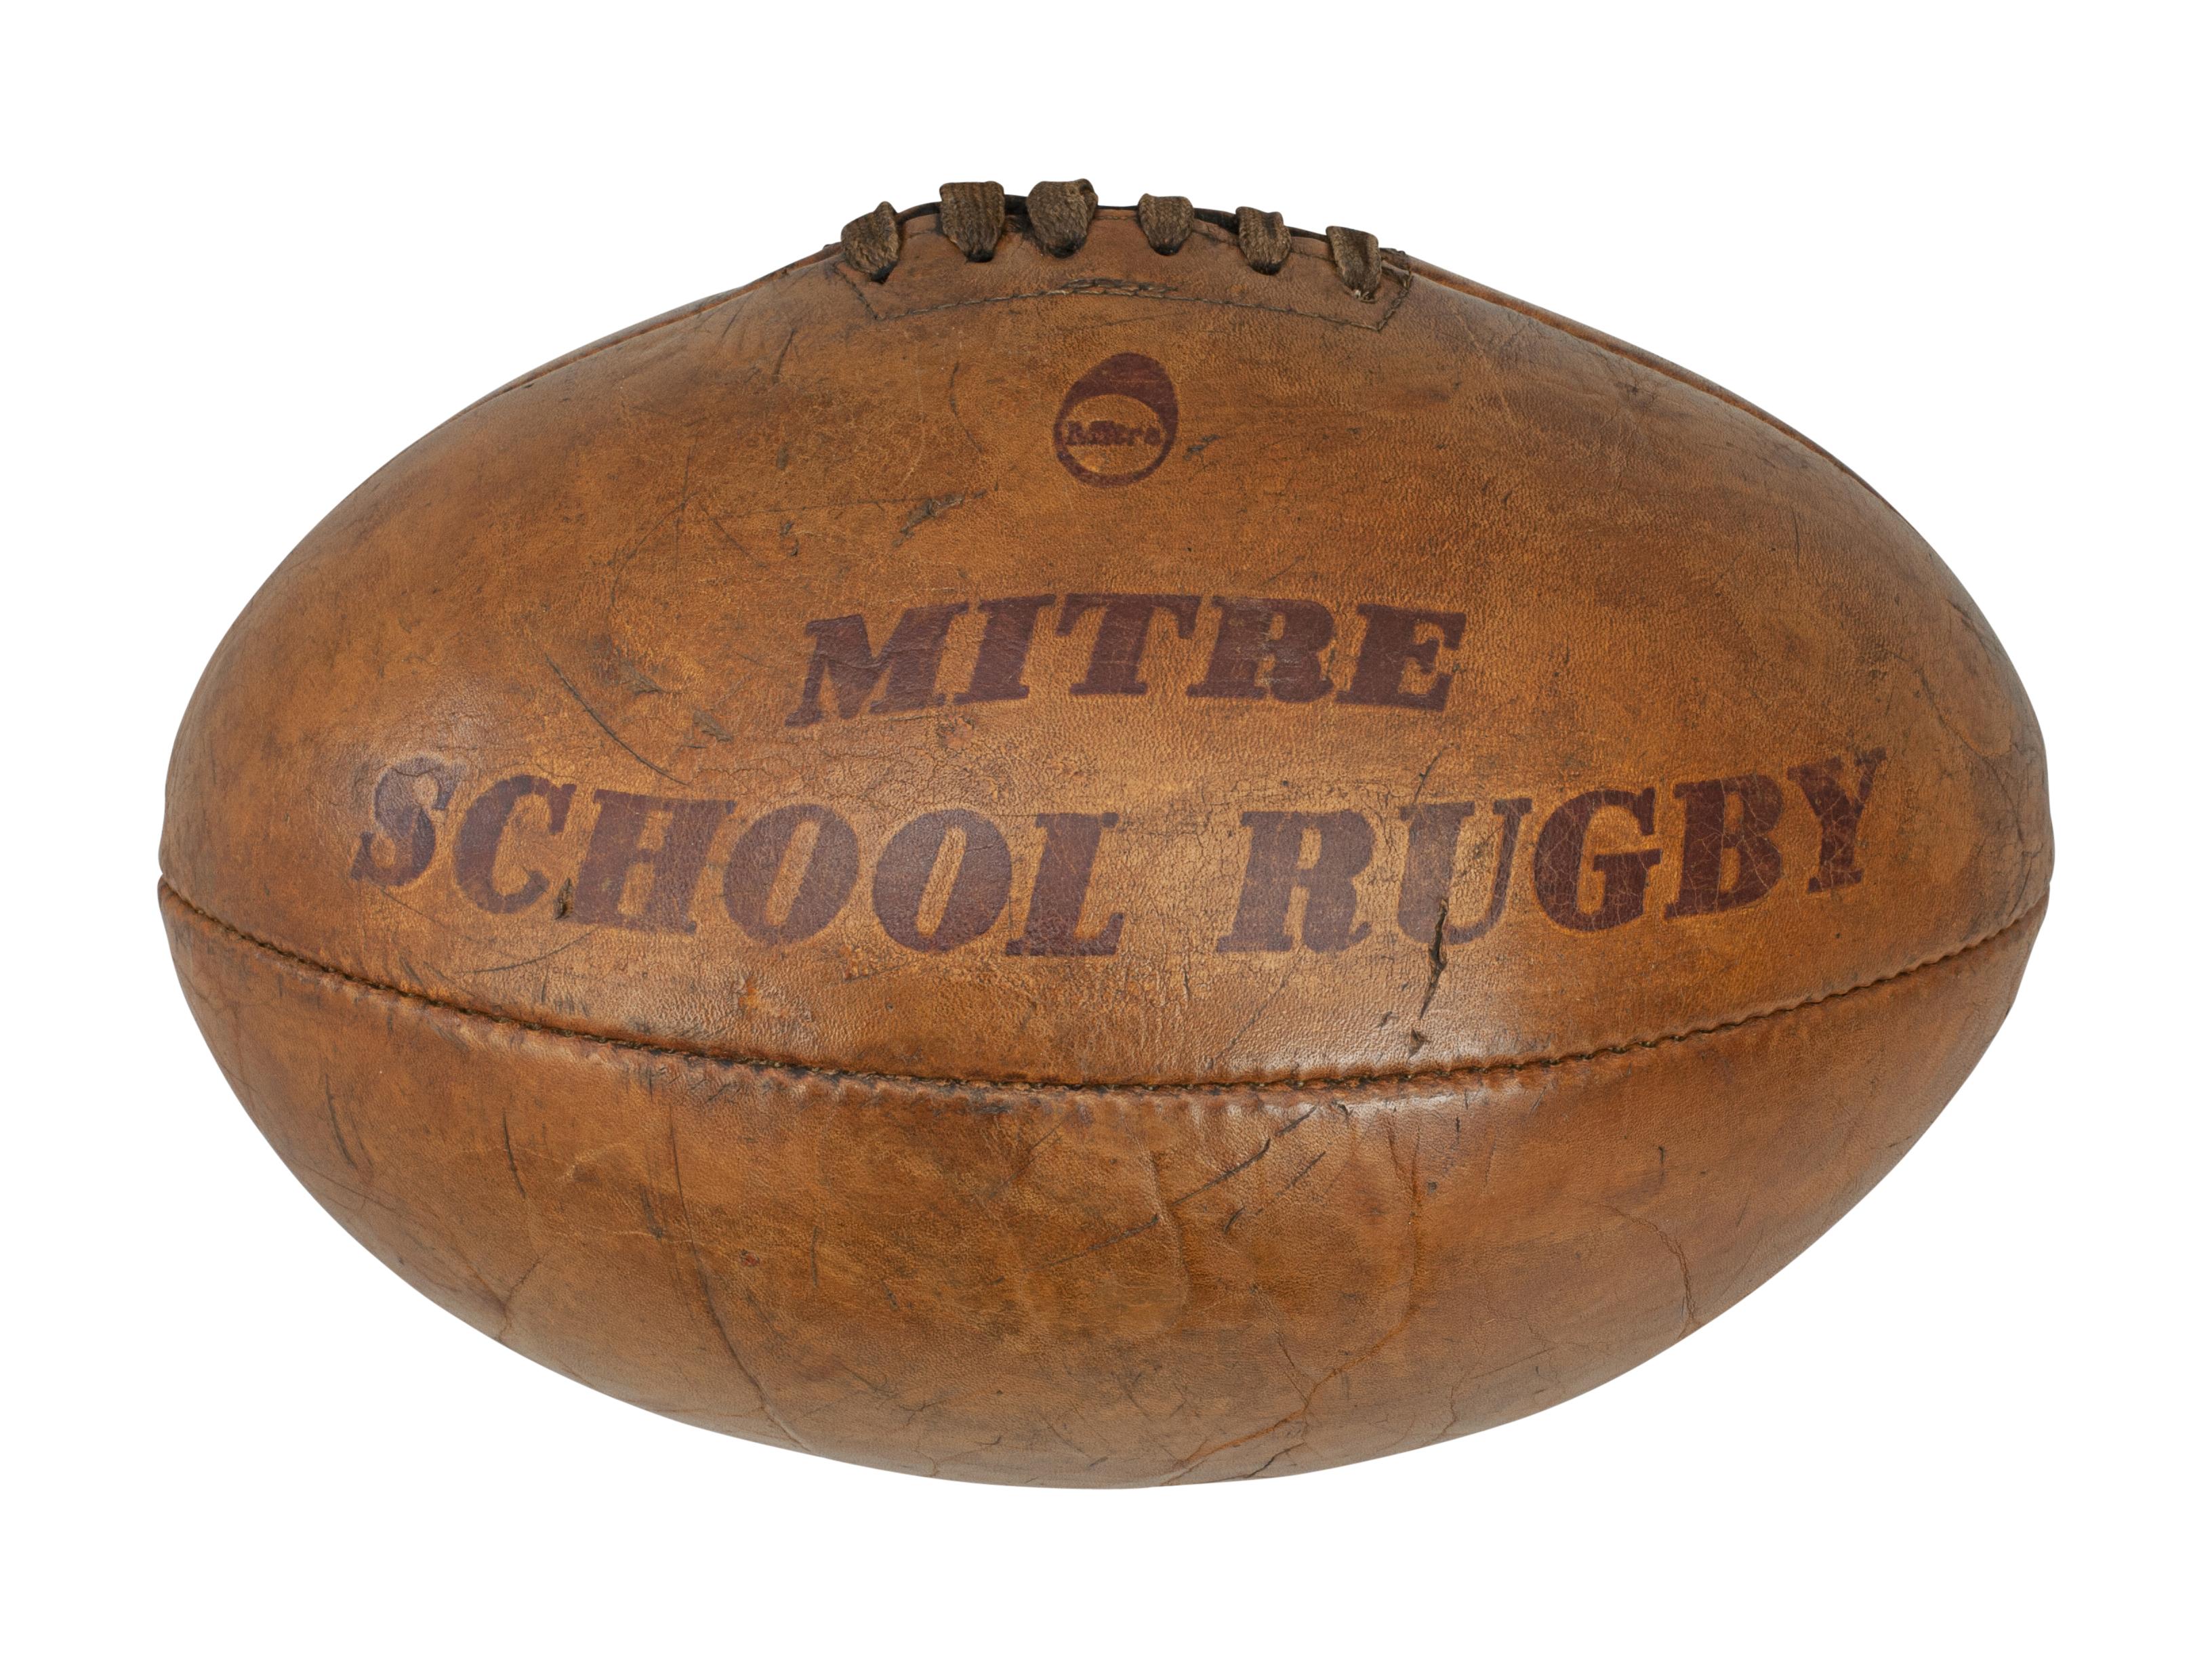 Vintage leather rugby ball.
A traditional Mitre No. 5 leather rugby ball with a lace-up slit to the top and valve for bladder inflation. The ball is with good tan brown colour. A nice four panel rugby ball embossed ' Mitre School Rugby' & the size